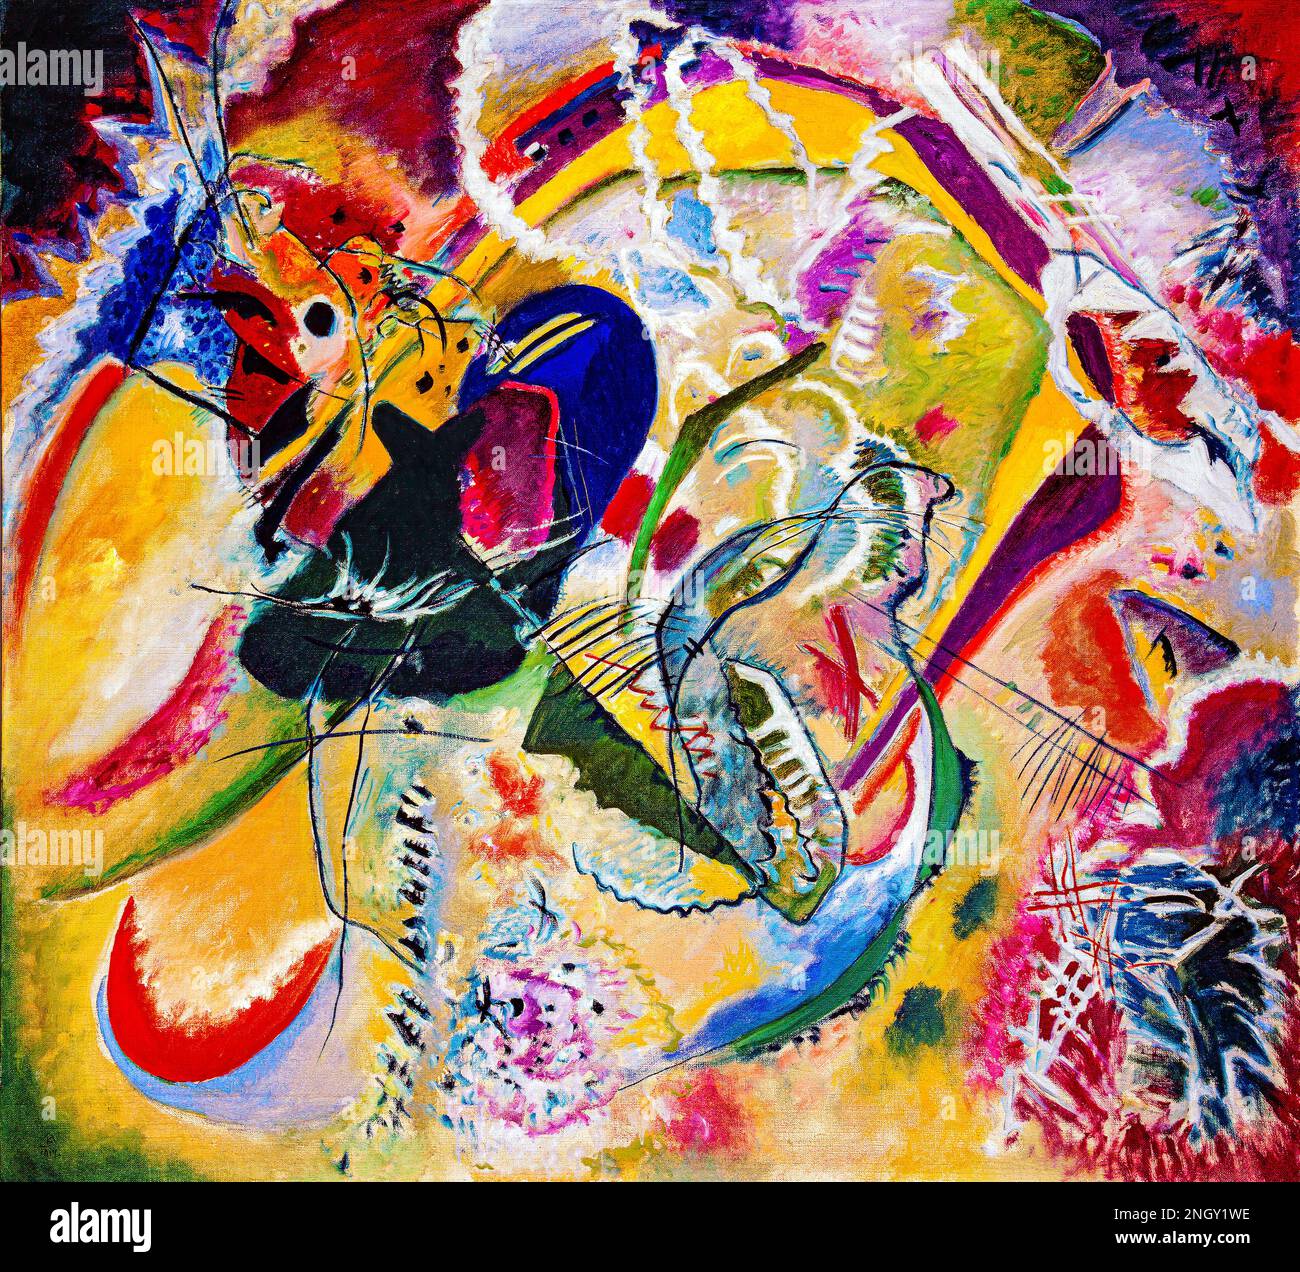 Improvisation 35 (1914) painting in high resolution by Wassily Kandinsky. Stock Photo